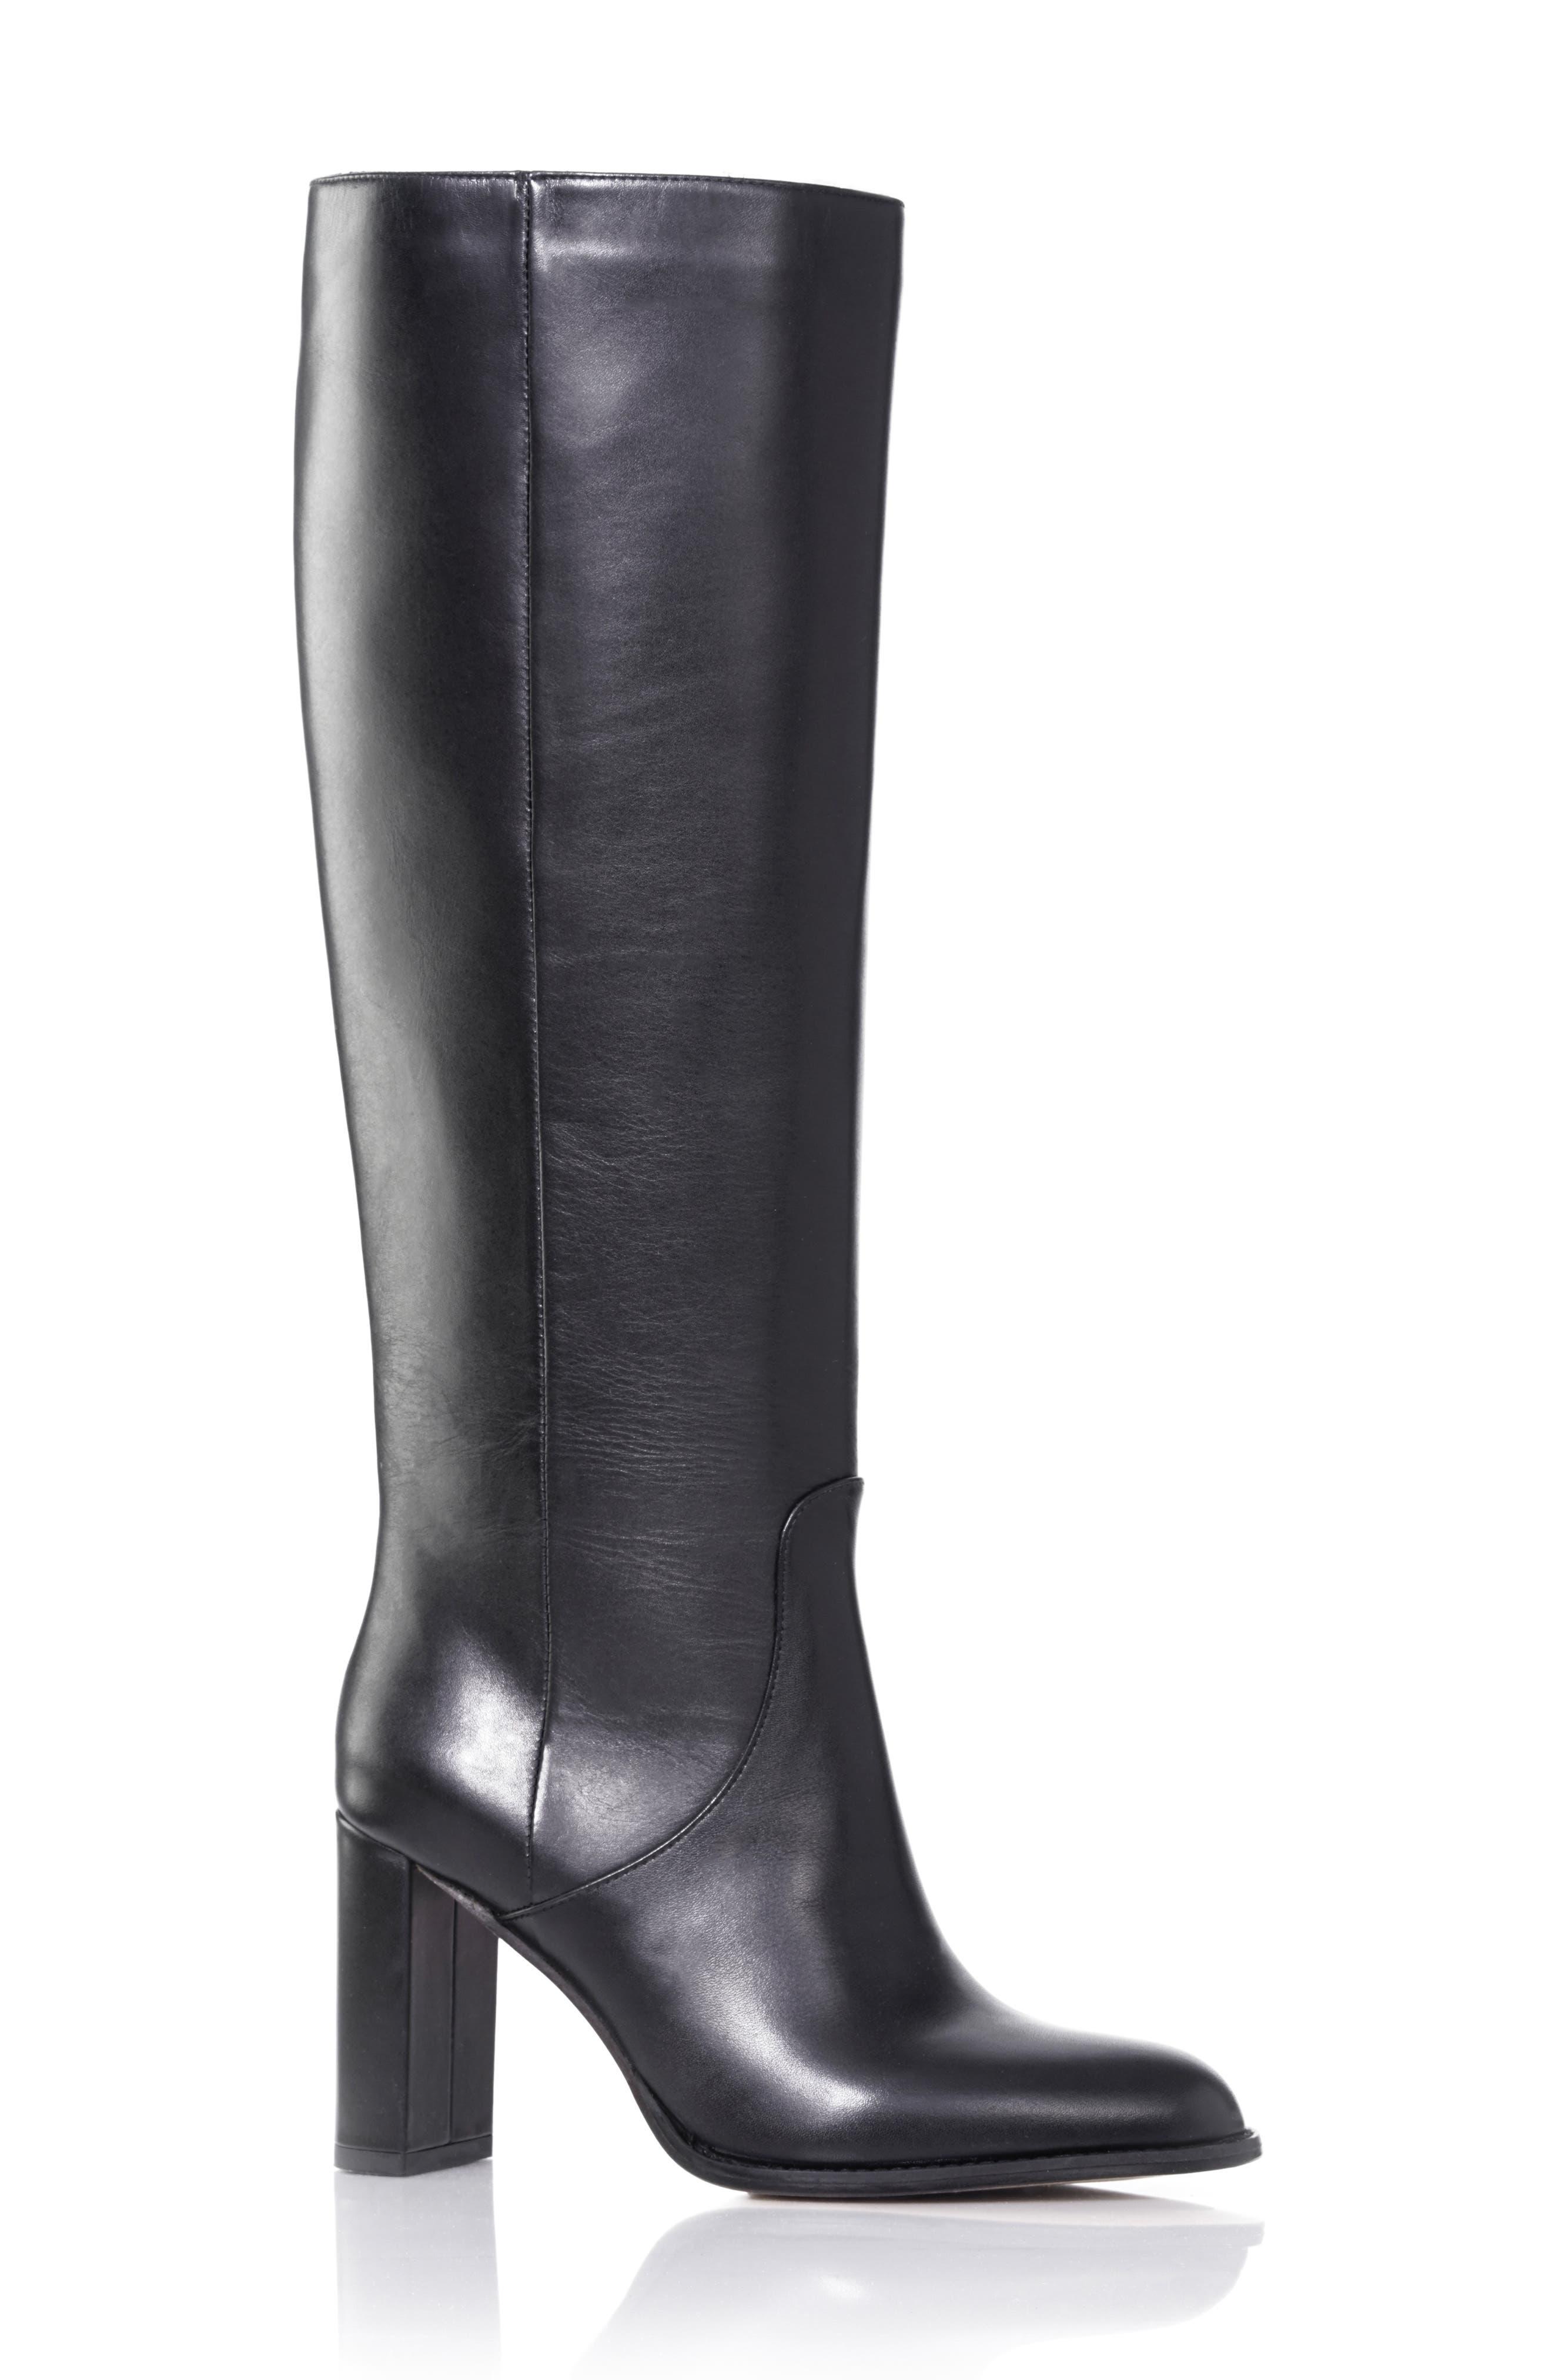 Marion Parke Dolly Tall Boot in Black | Lyst